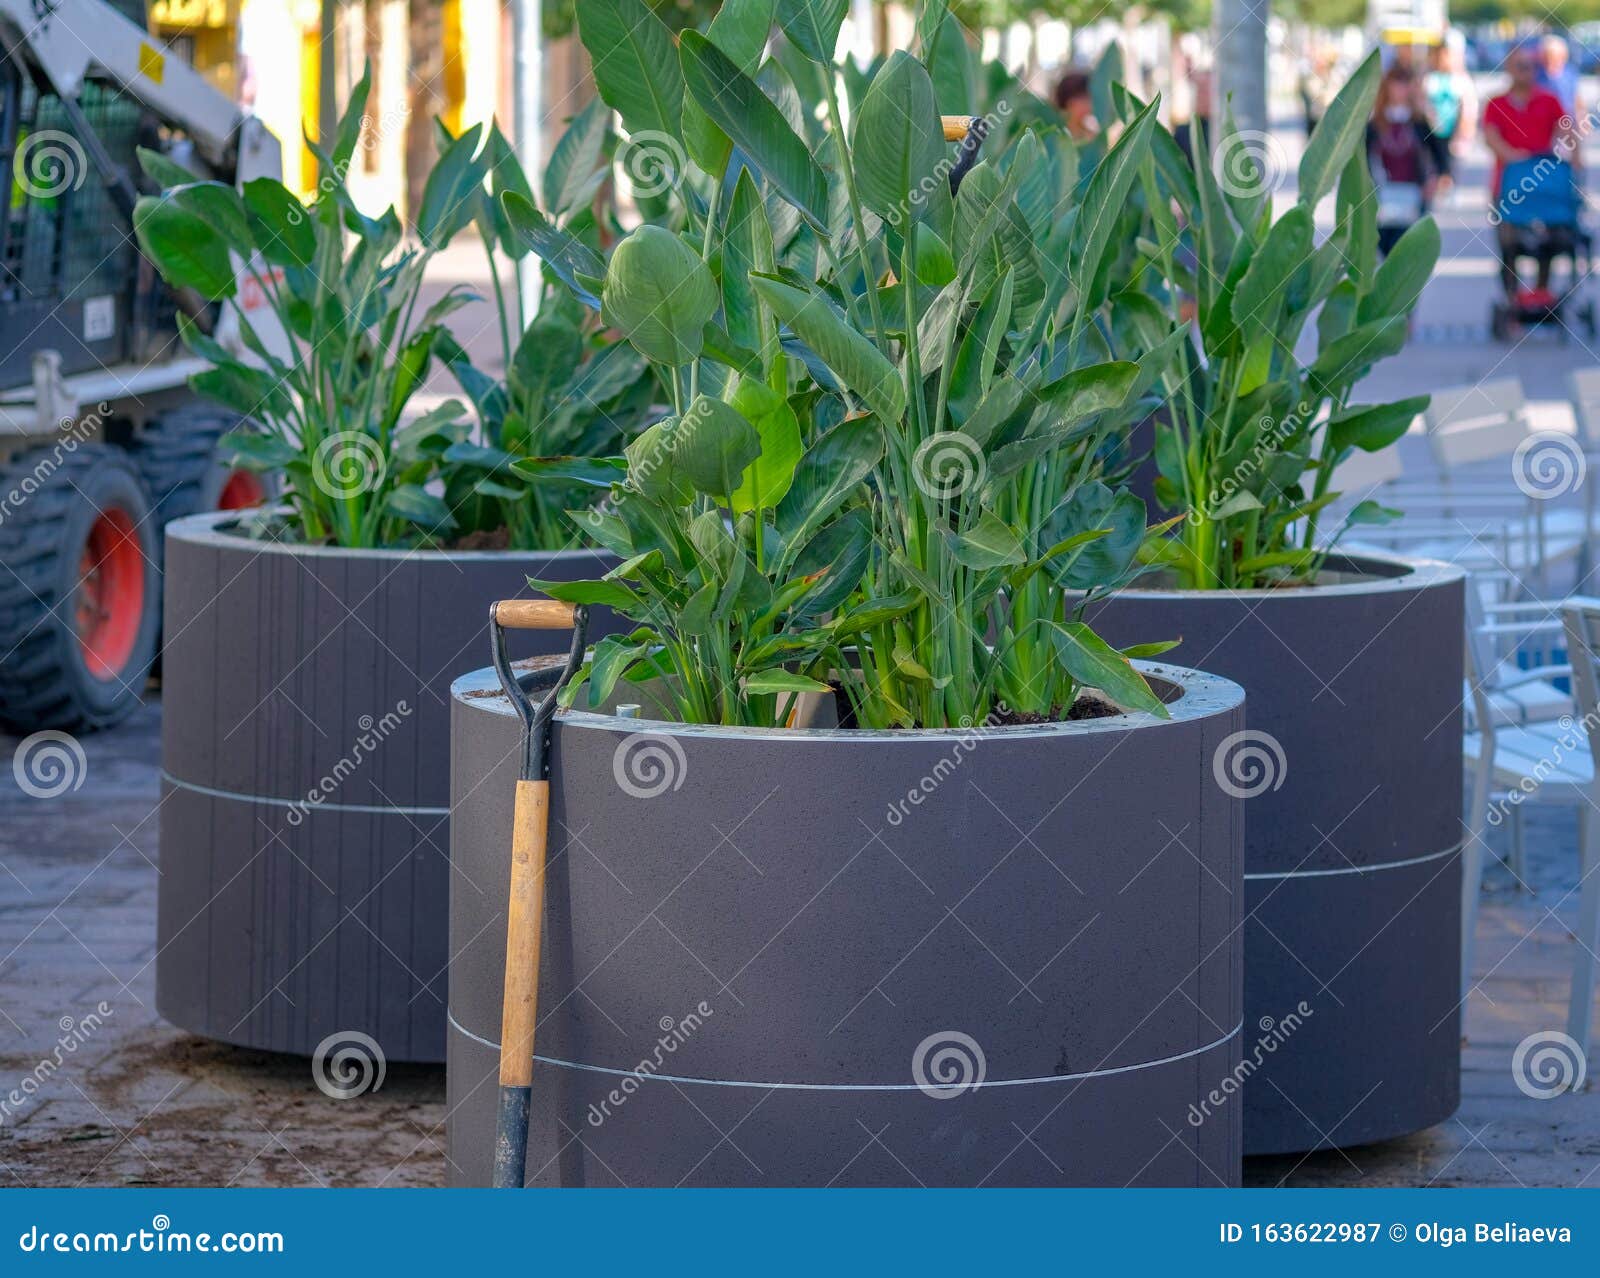 Installation Of Large Pots For Plants On The Main Street Stock